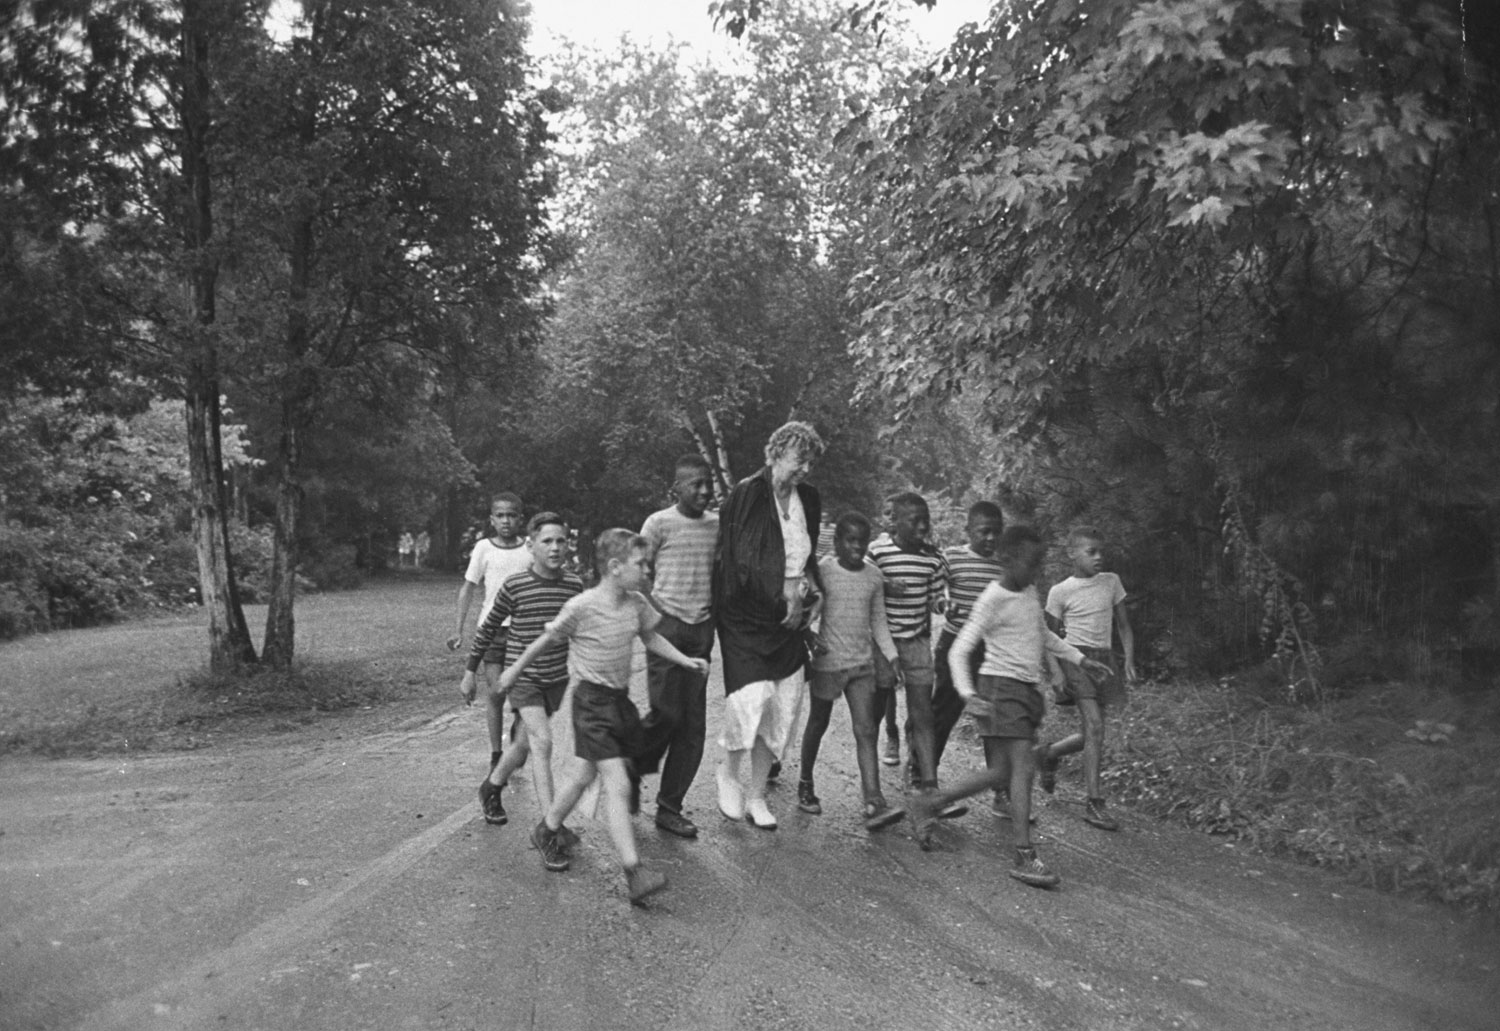 Former First Lady Eleanor Roosevelt walks with children en route to a picnic, 1948.